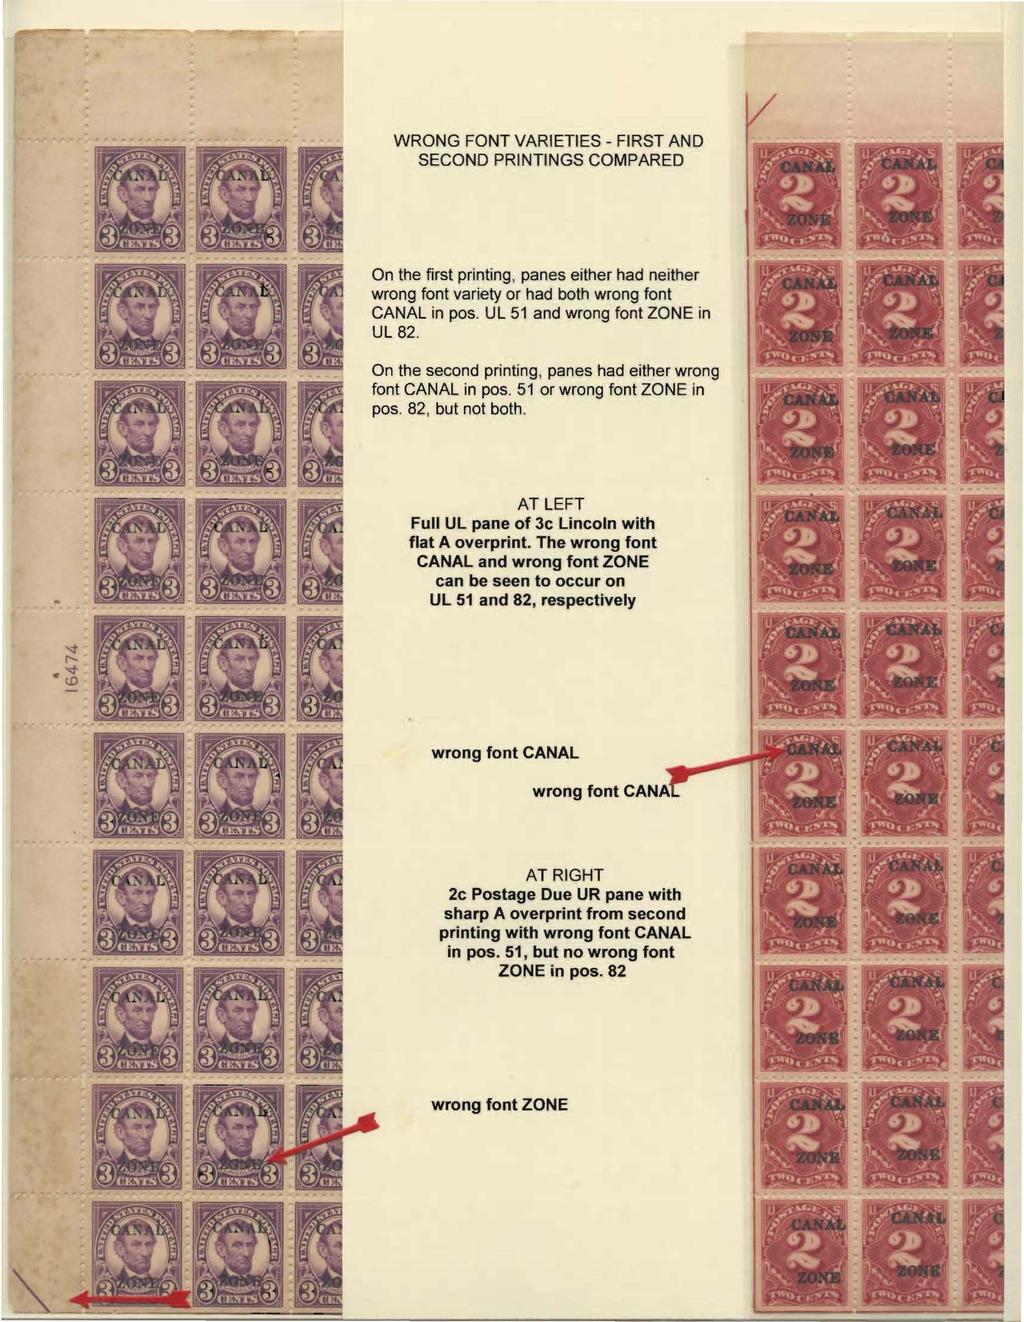 WRONG FONT VARIETIES - FIRST AND SECOND PRINTINGS COMPARED On the first printing, panes either had neither wrong font variety or had both wrong font CANAL in pos. UL 51 and wrong font ZONE in UL 82.